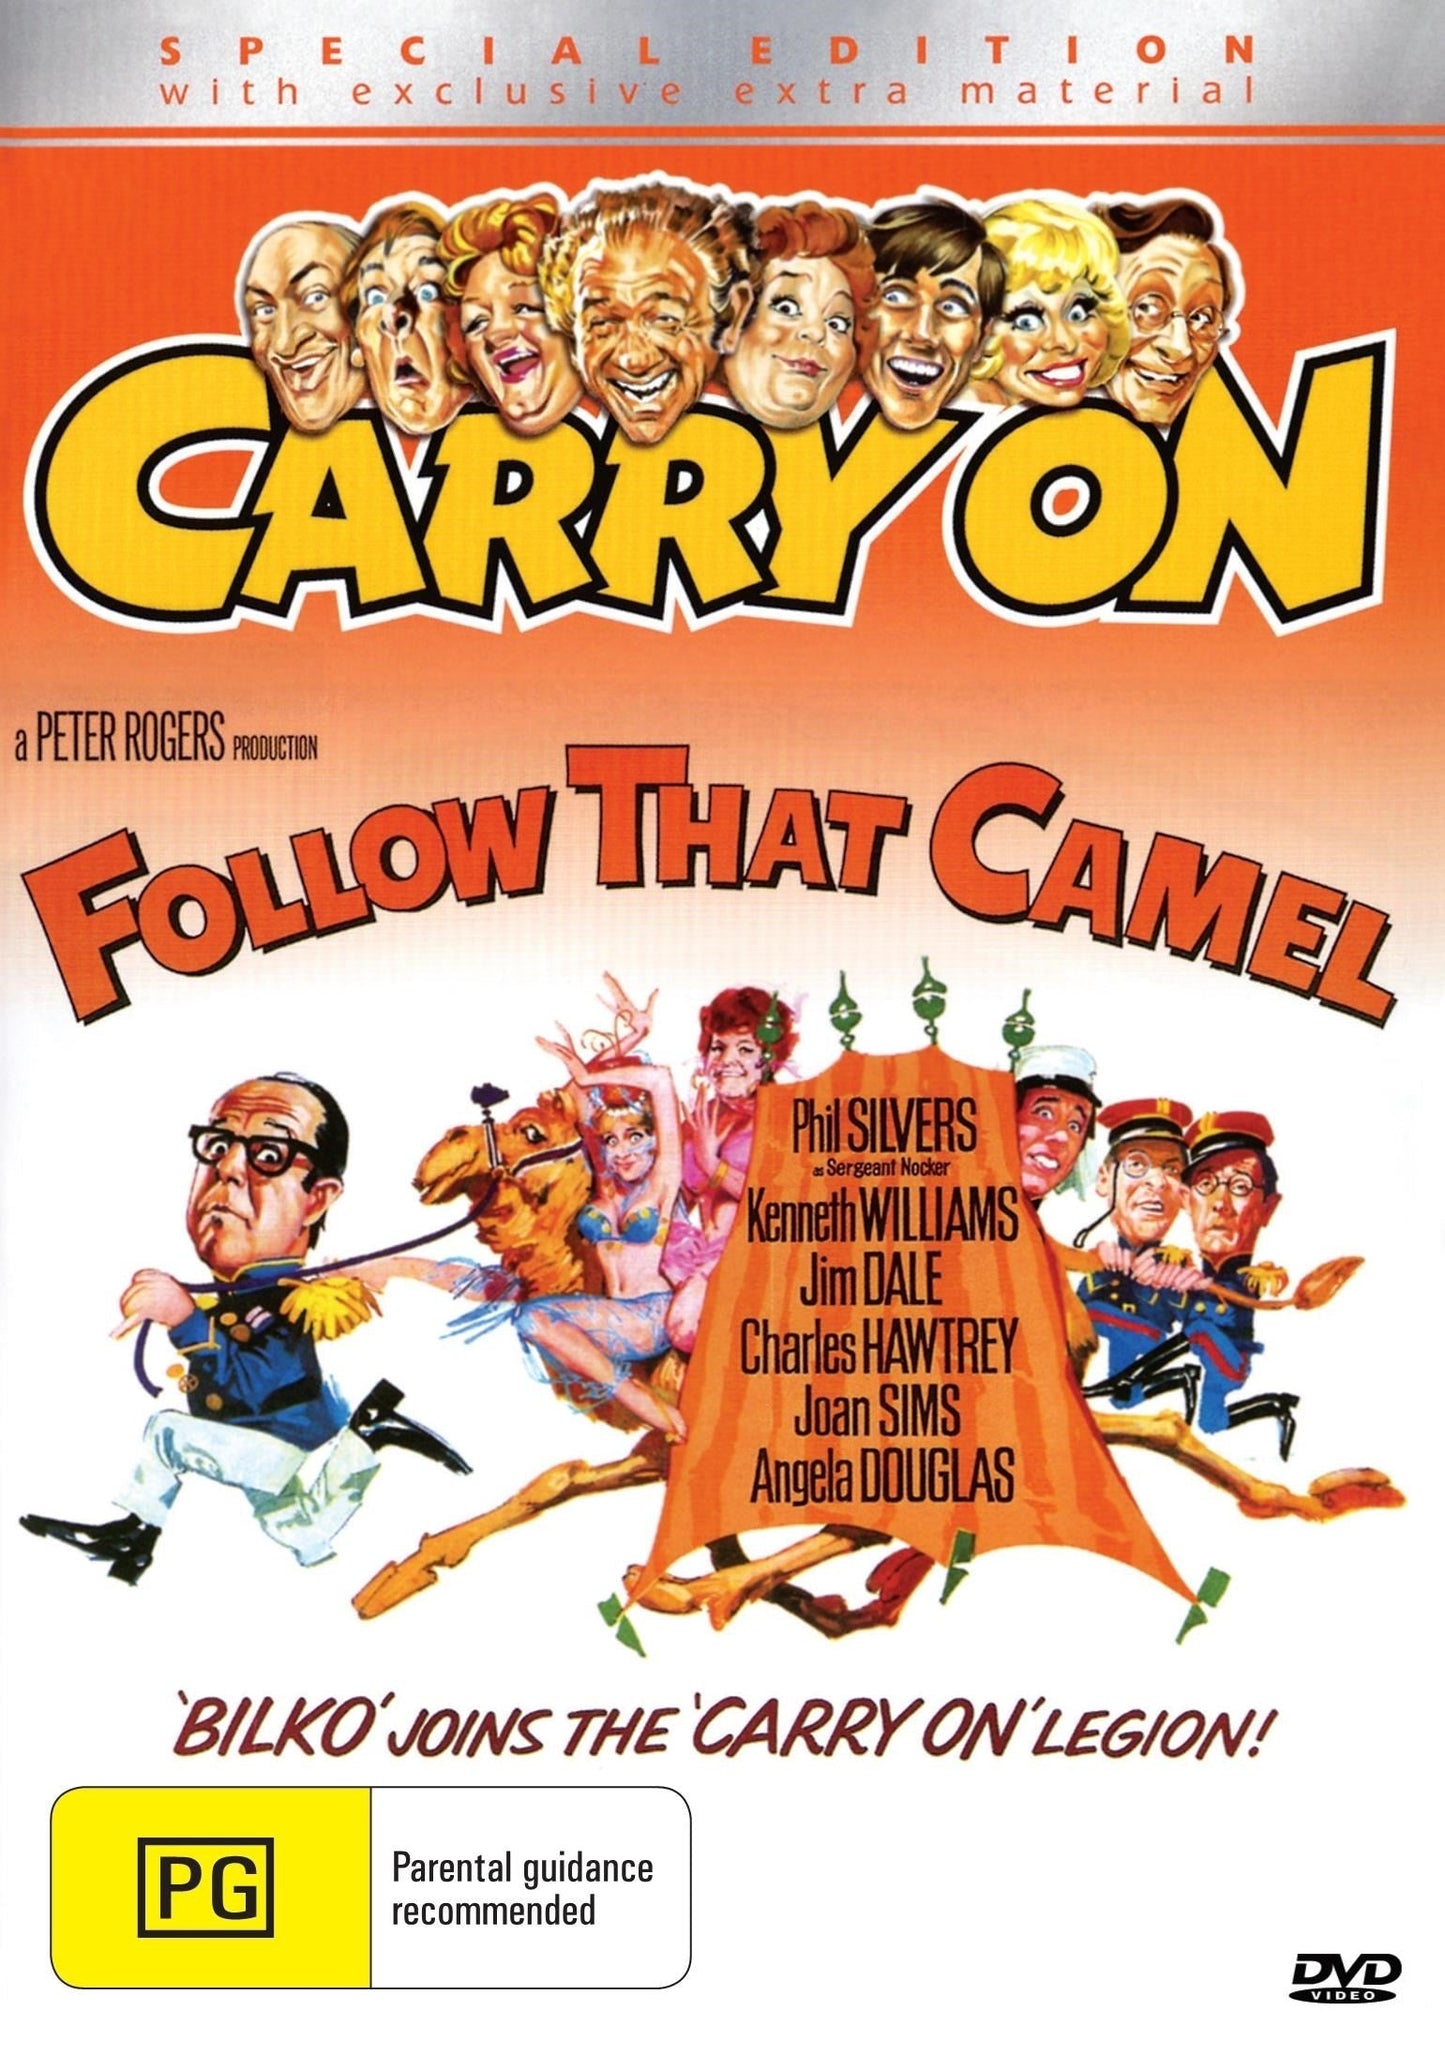 Carry On Follow That Camel rareandcollectibledvds